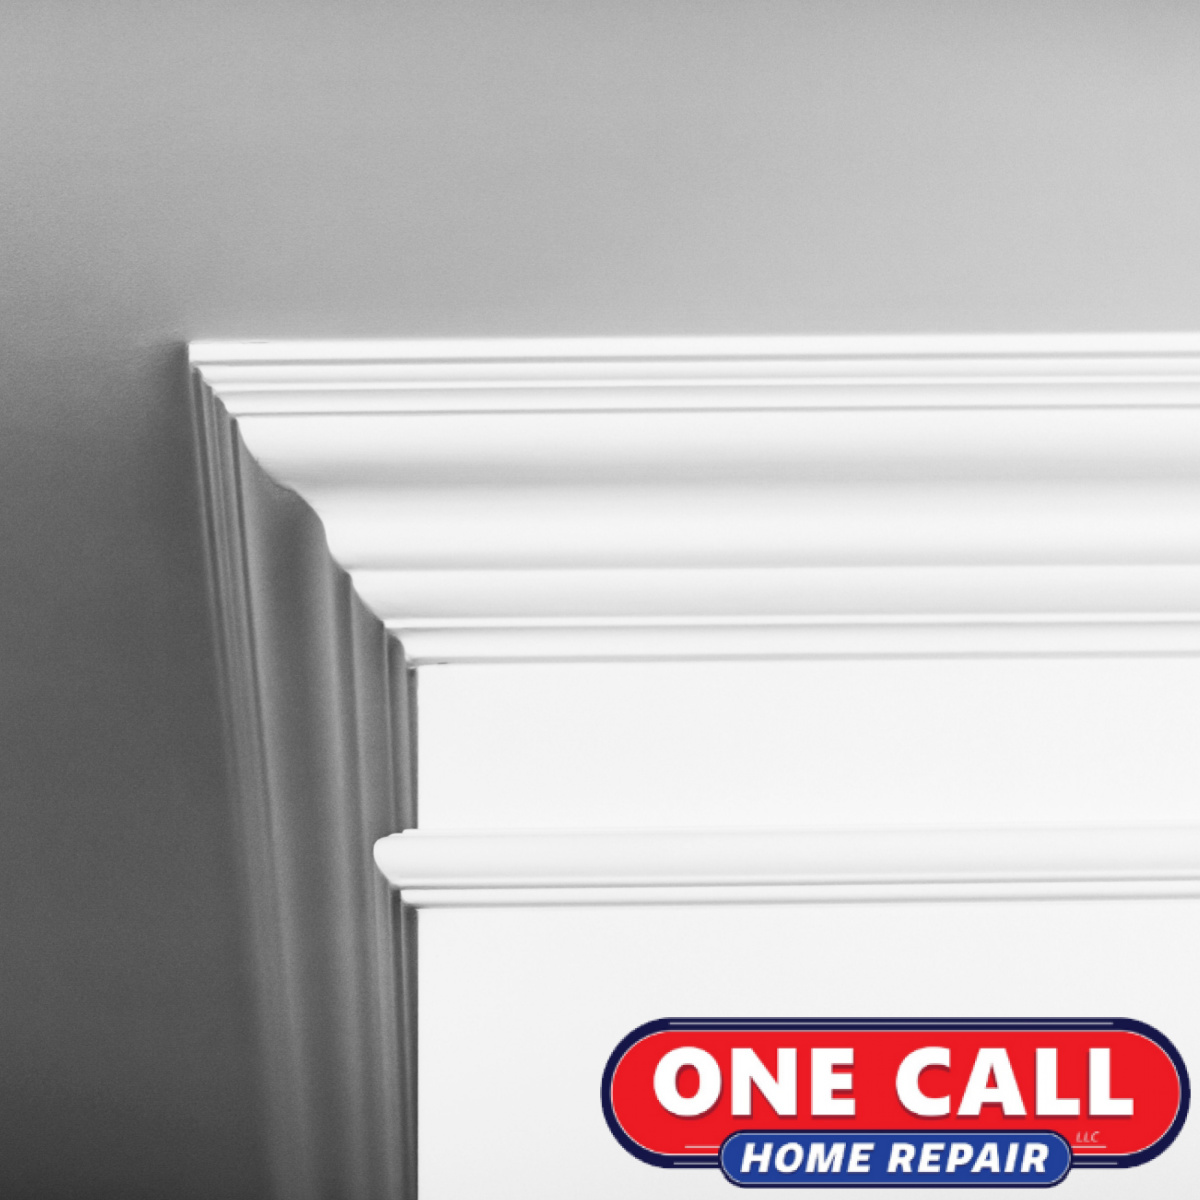 Interior Crown Molding: Professional Installation and Repair Services in Seattle